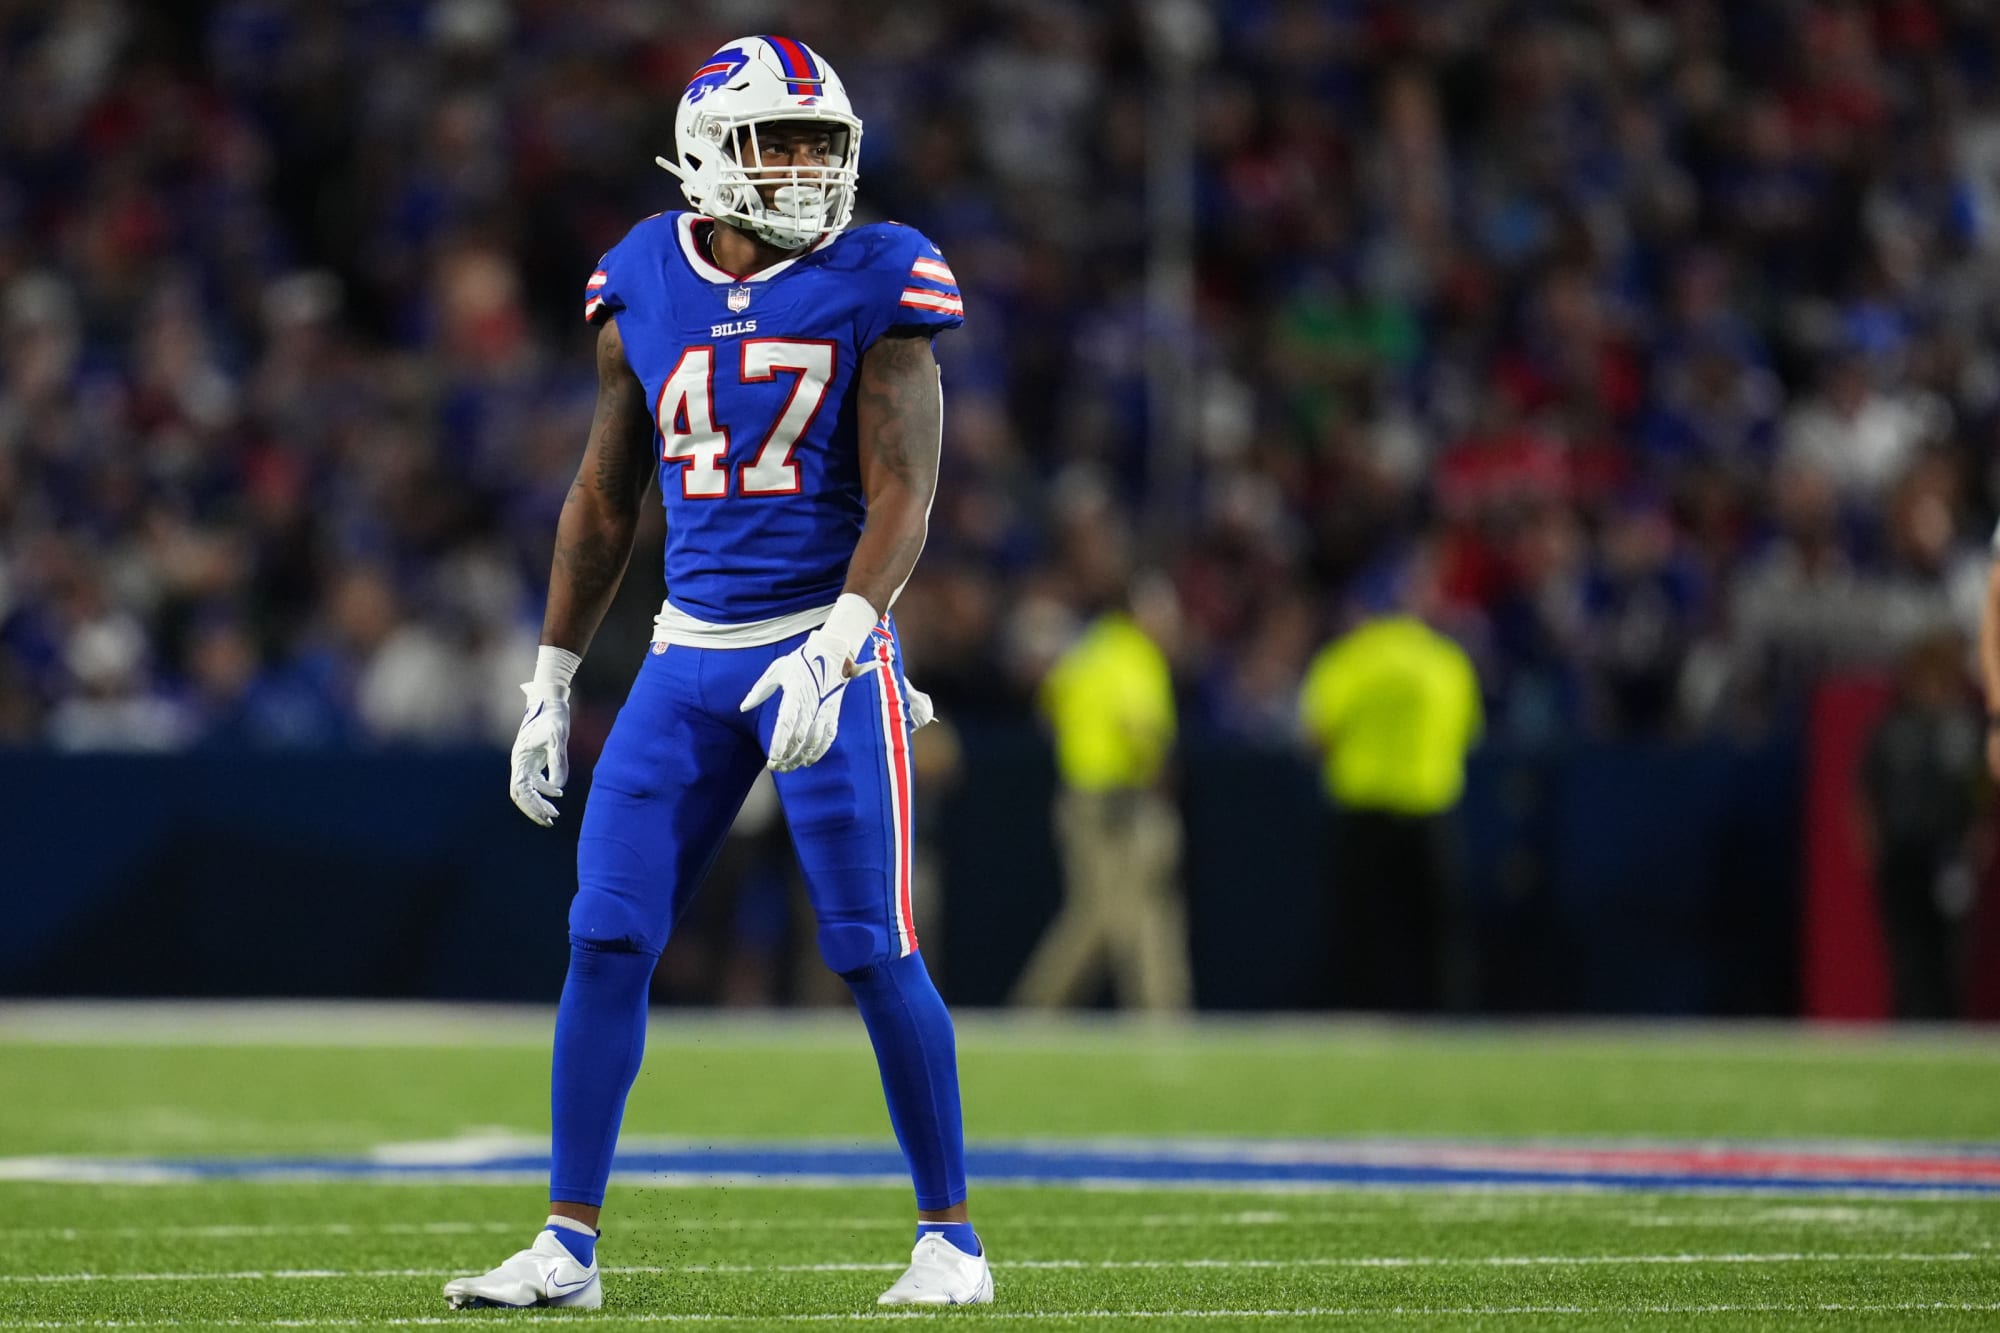 Who is the ‘next man up’ for the Buffalo Bills with latest round of injuries?